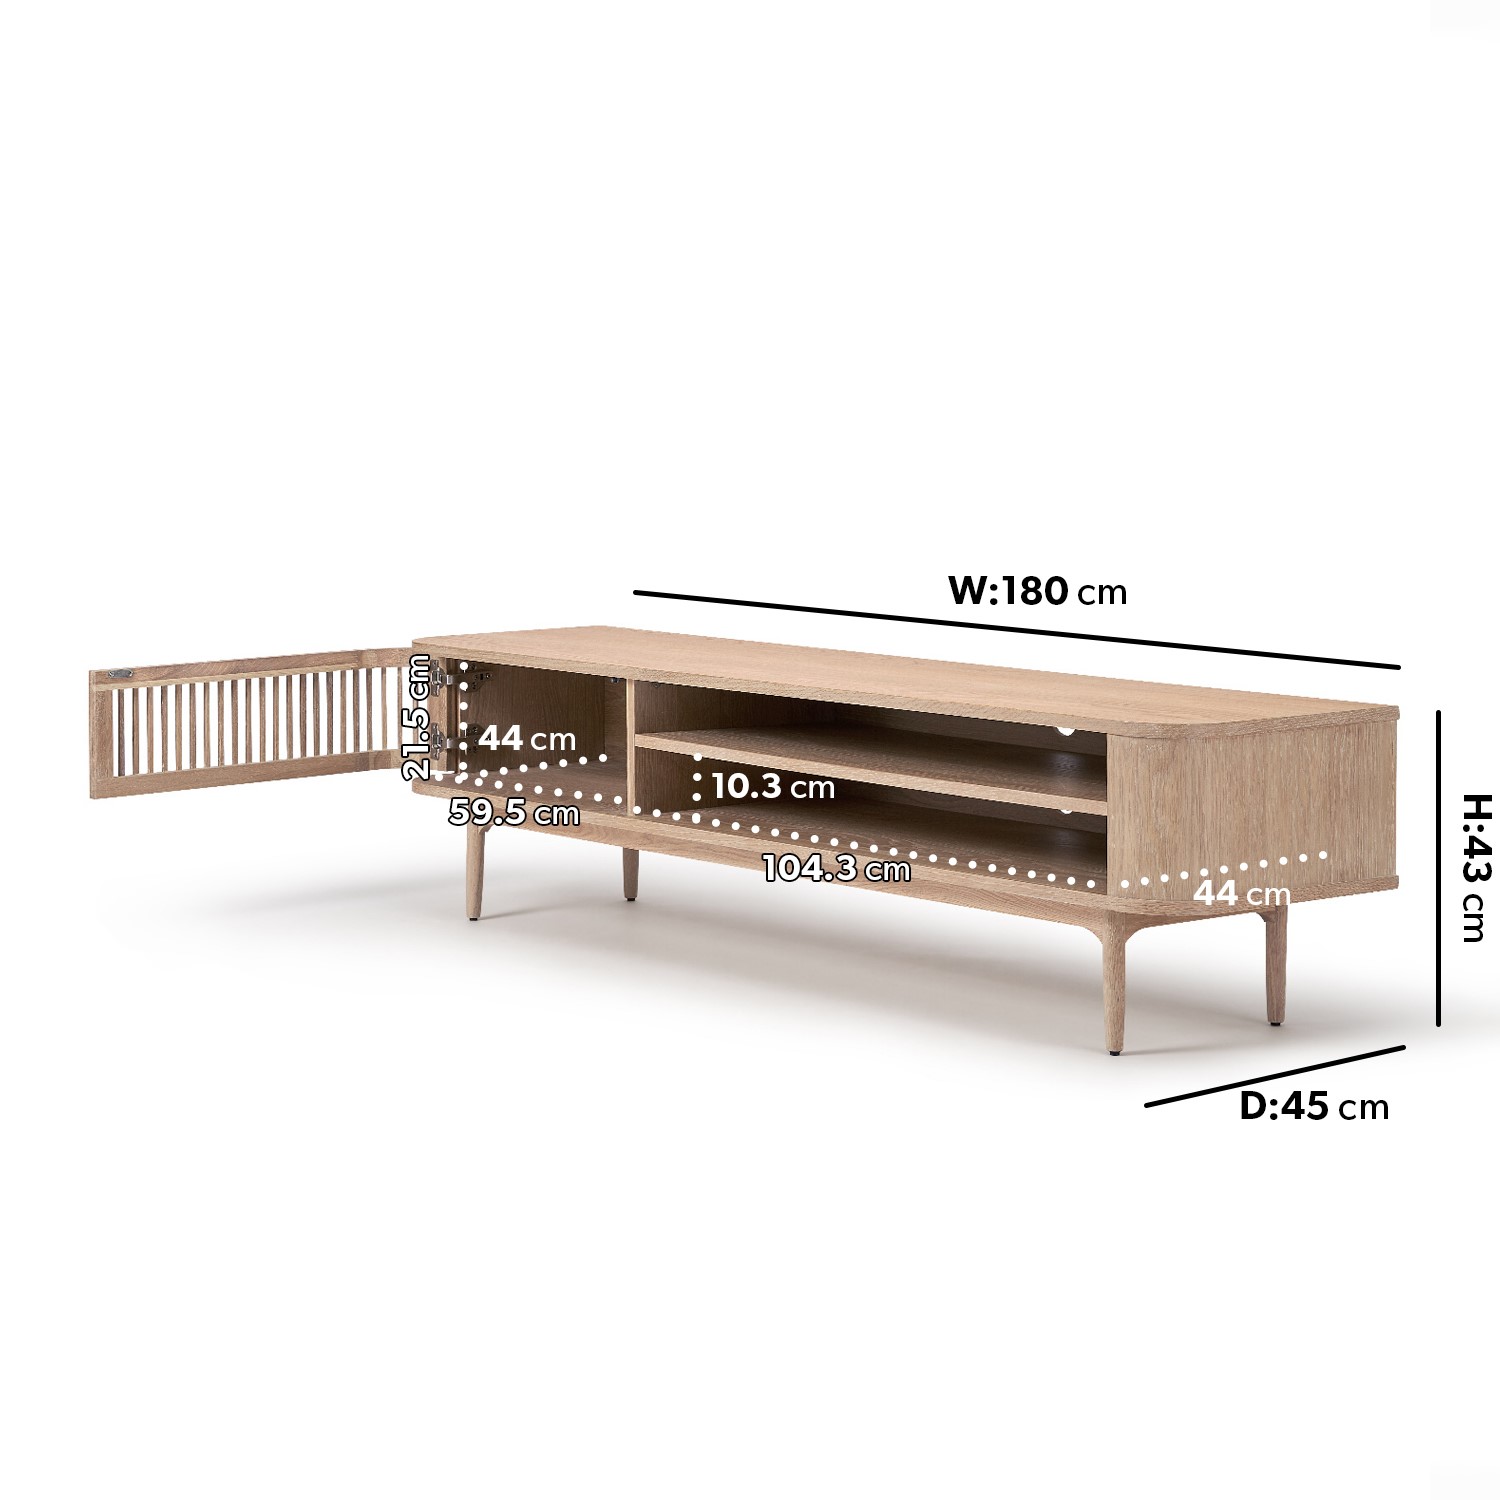 Read more about Wide light oak tv stand with storage tvs up to 77 jarel